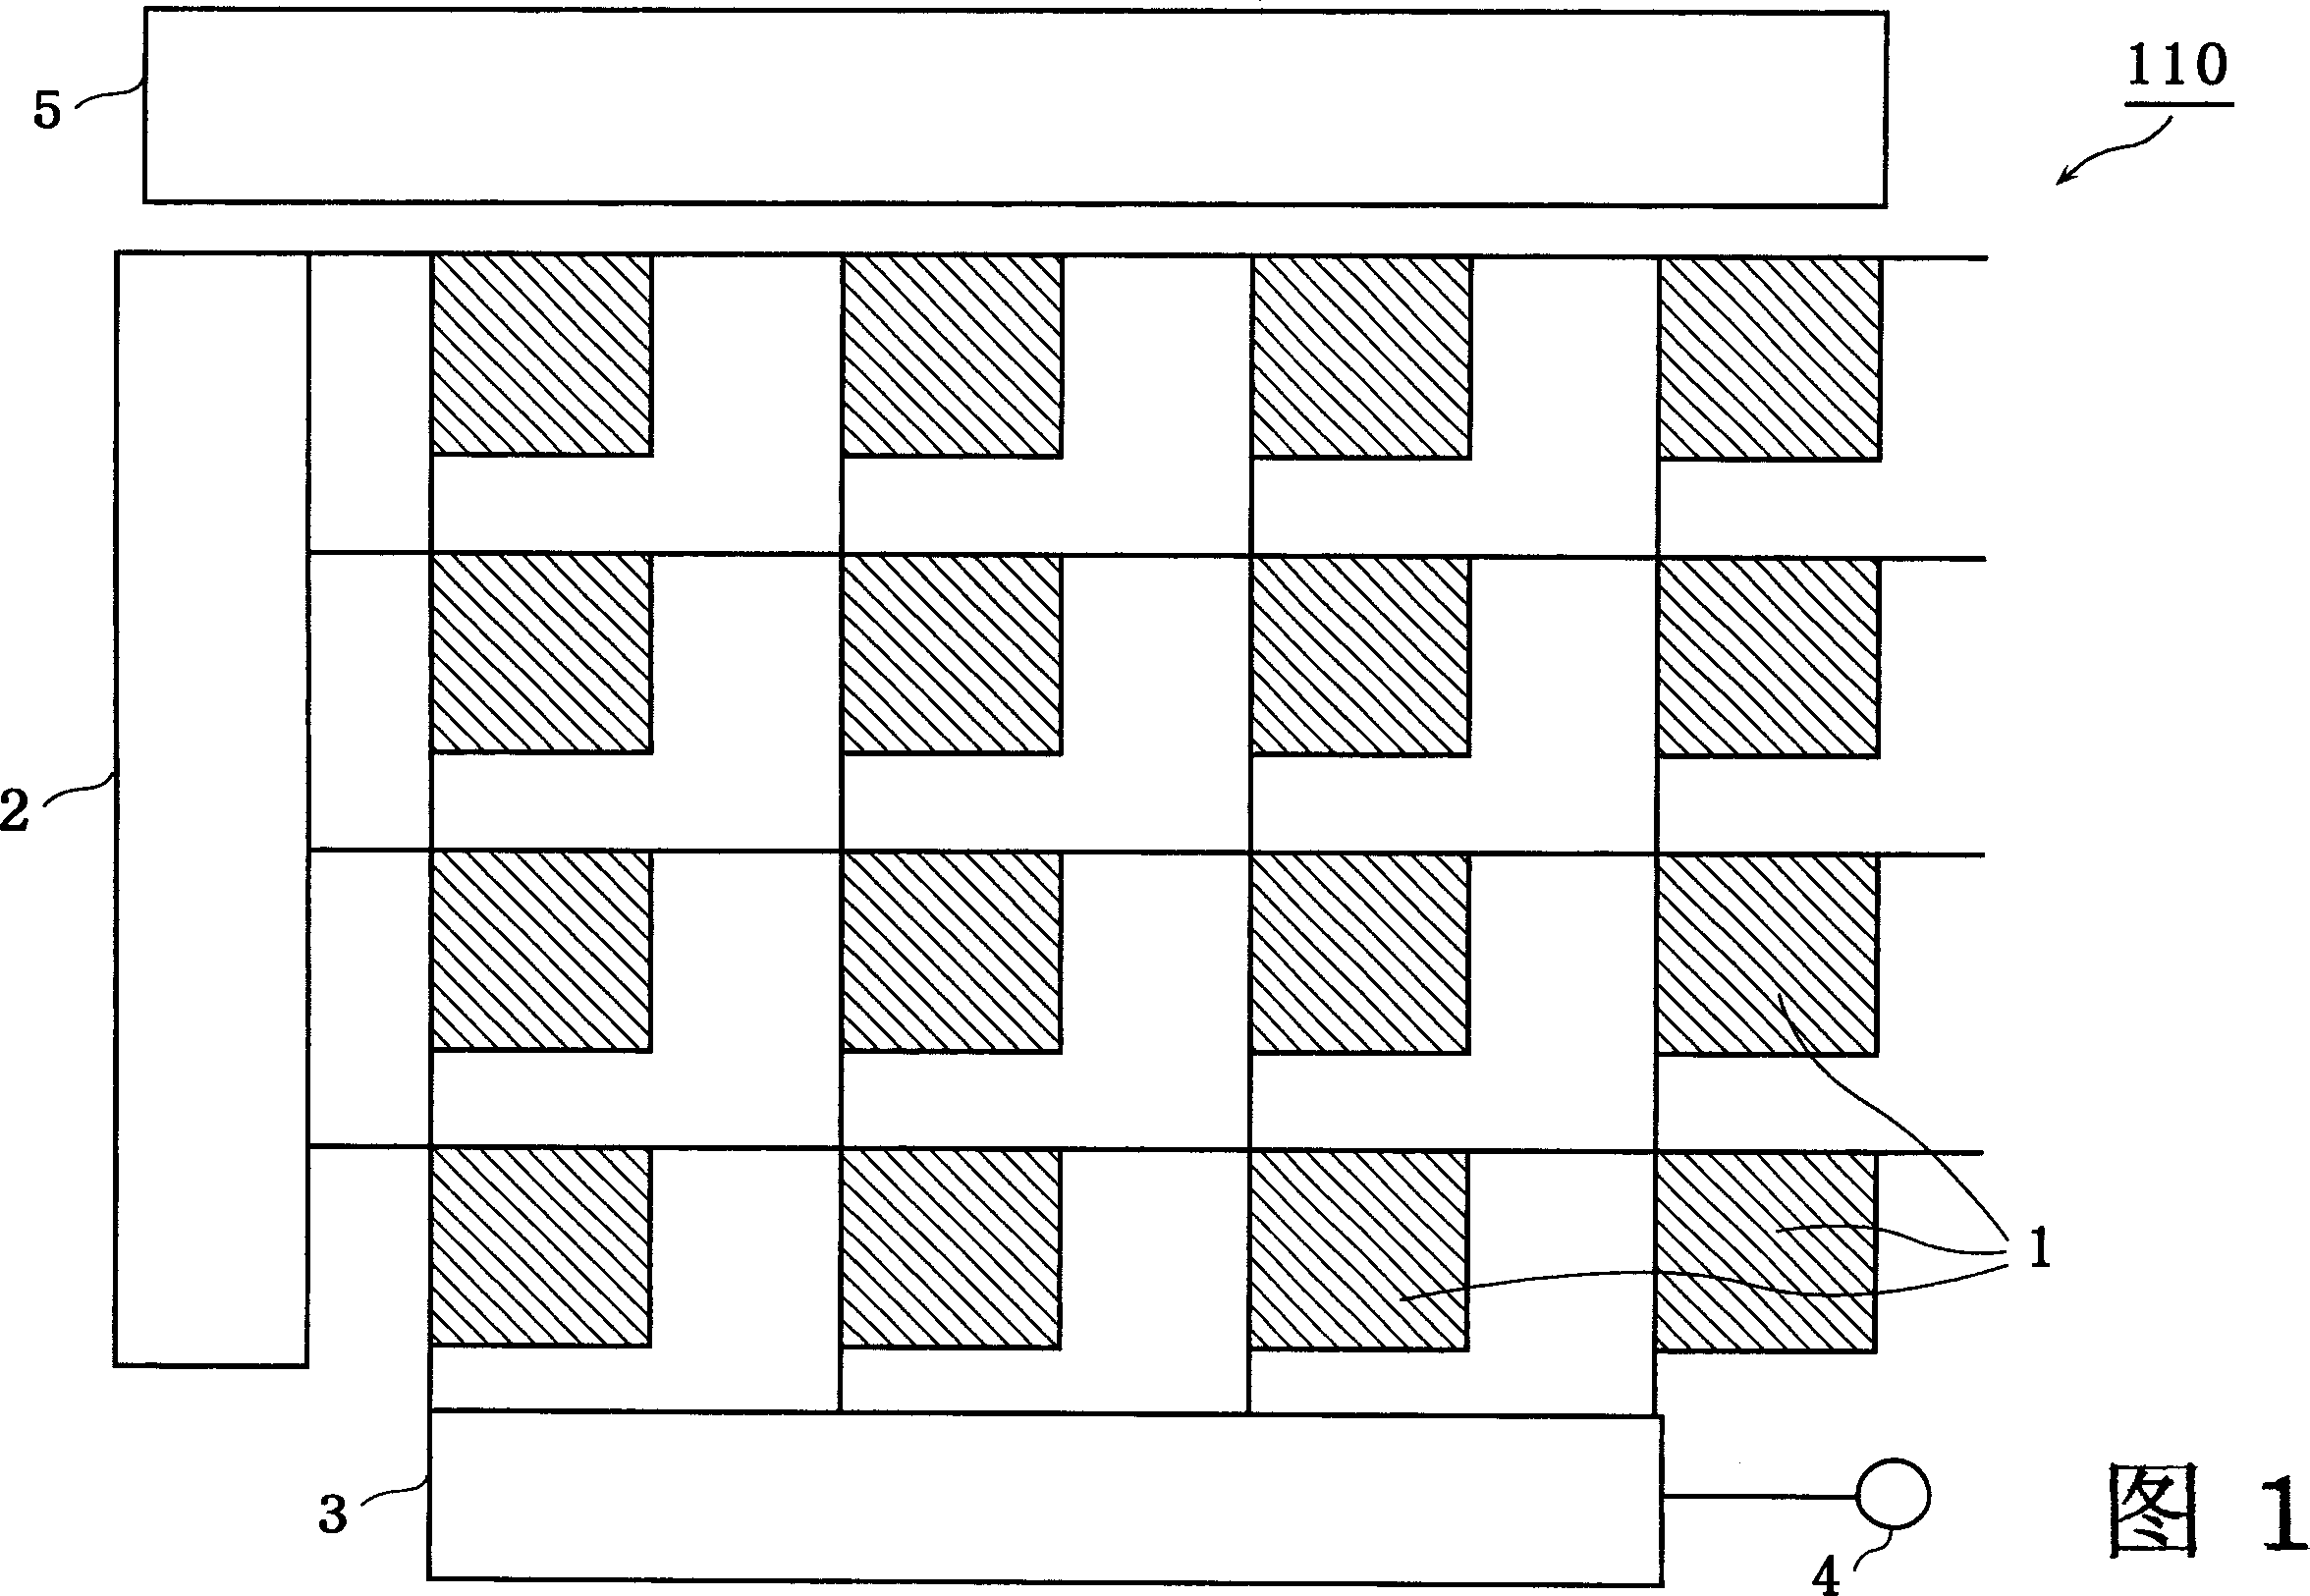 Solid-state imaging device, method for manufacturing the same, and camera using the same